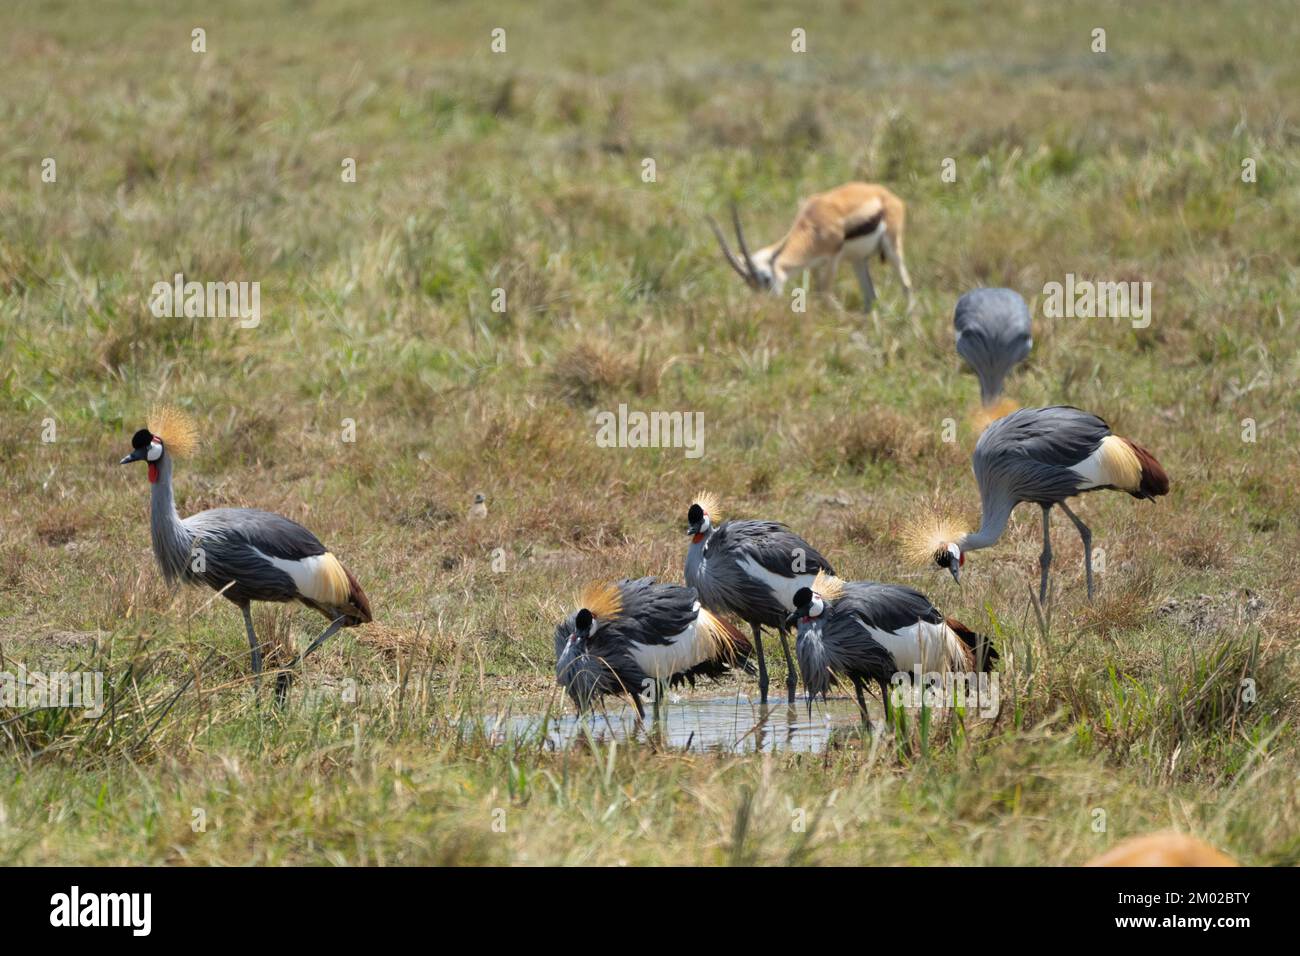 East African crowned crane In Serengeti National Park, Tanzania Stock Photo